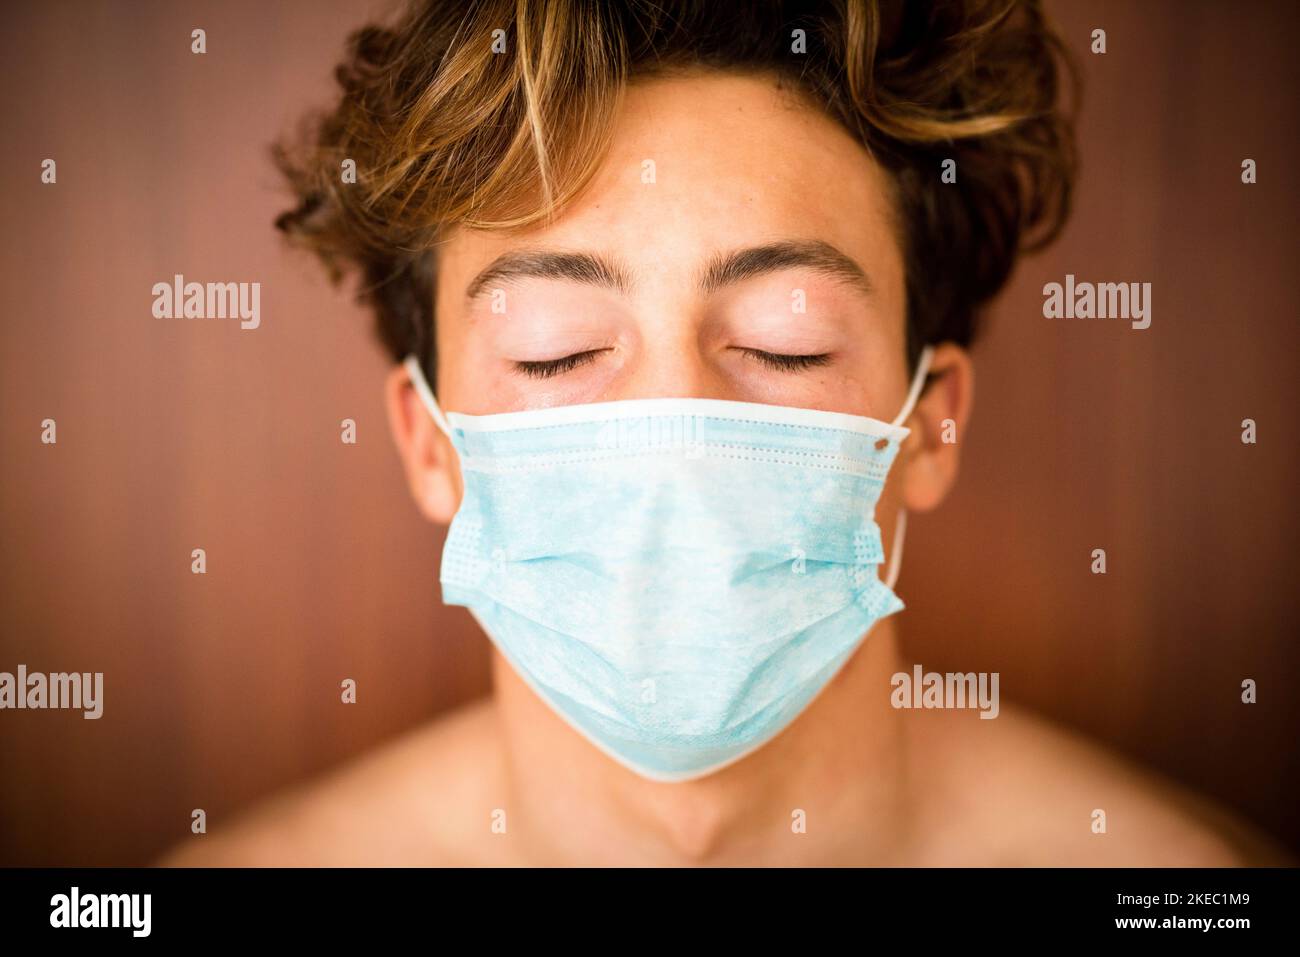 portrait and close up of man teenager or millennial boy with close eyes wearing medical and surgical mask on his face to prevent coronavirus or covid-19 or any type of disease or flu Stock Photo